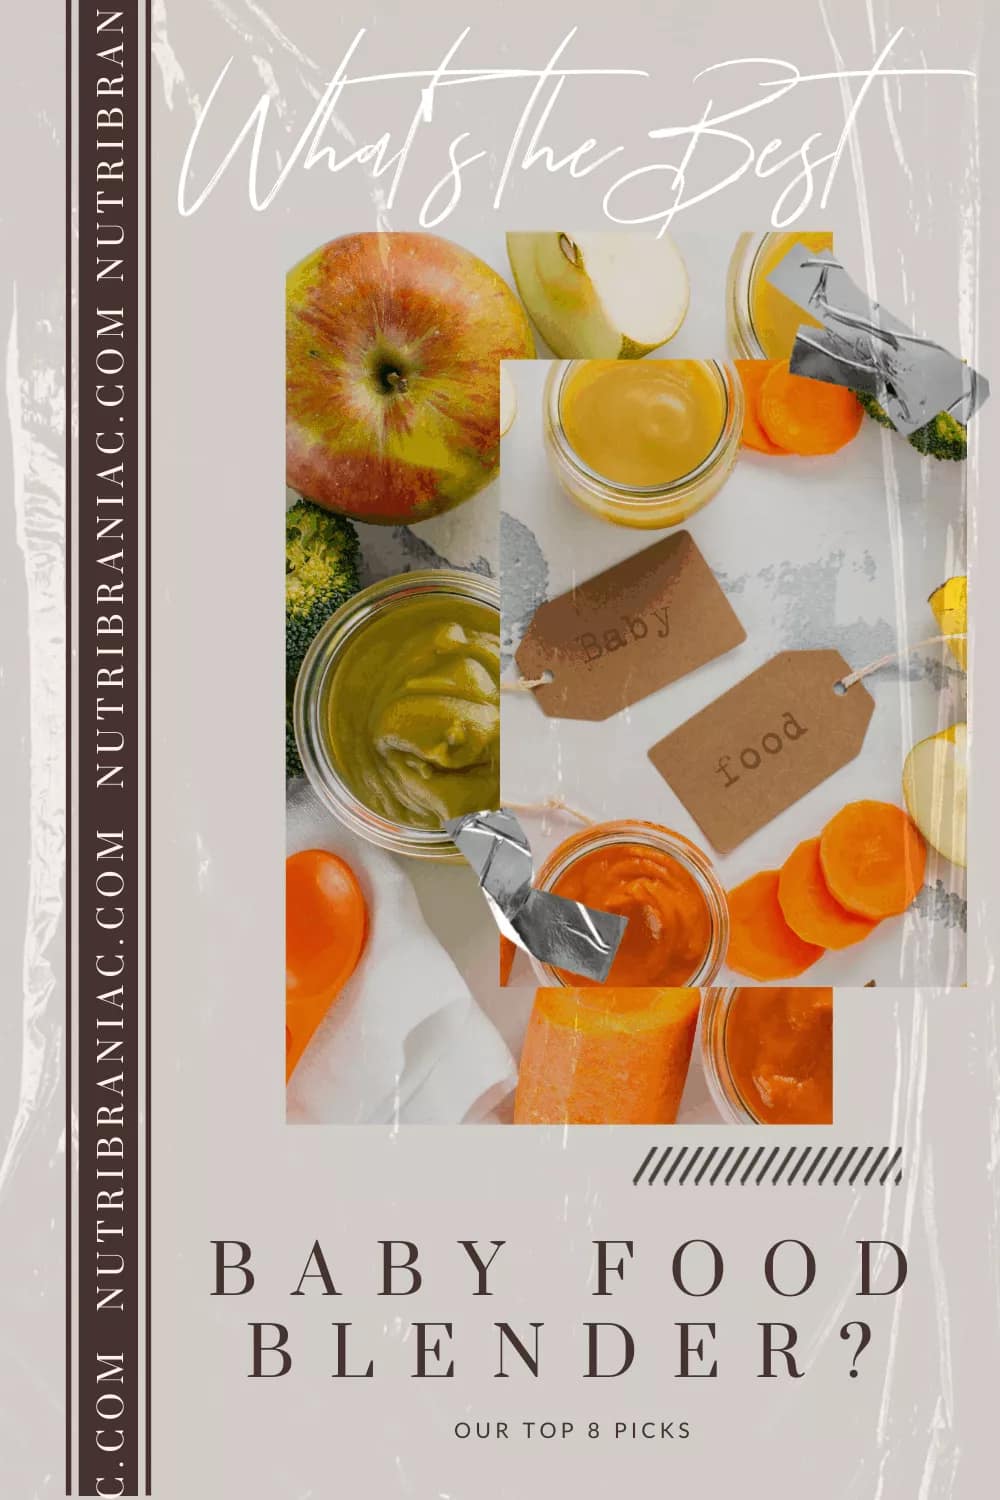 Image of a fruits and vegetables surrounding jars of baby food with text overlay, "Our Favorite Baby Food Blenders"